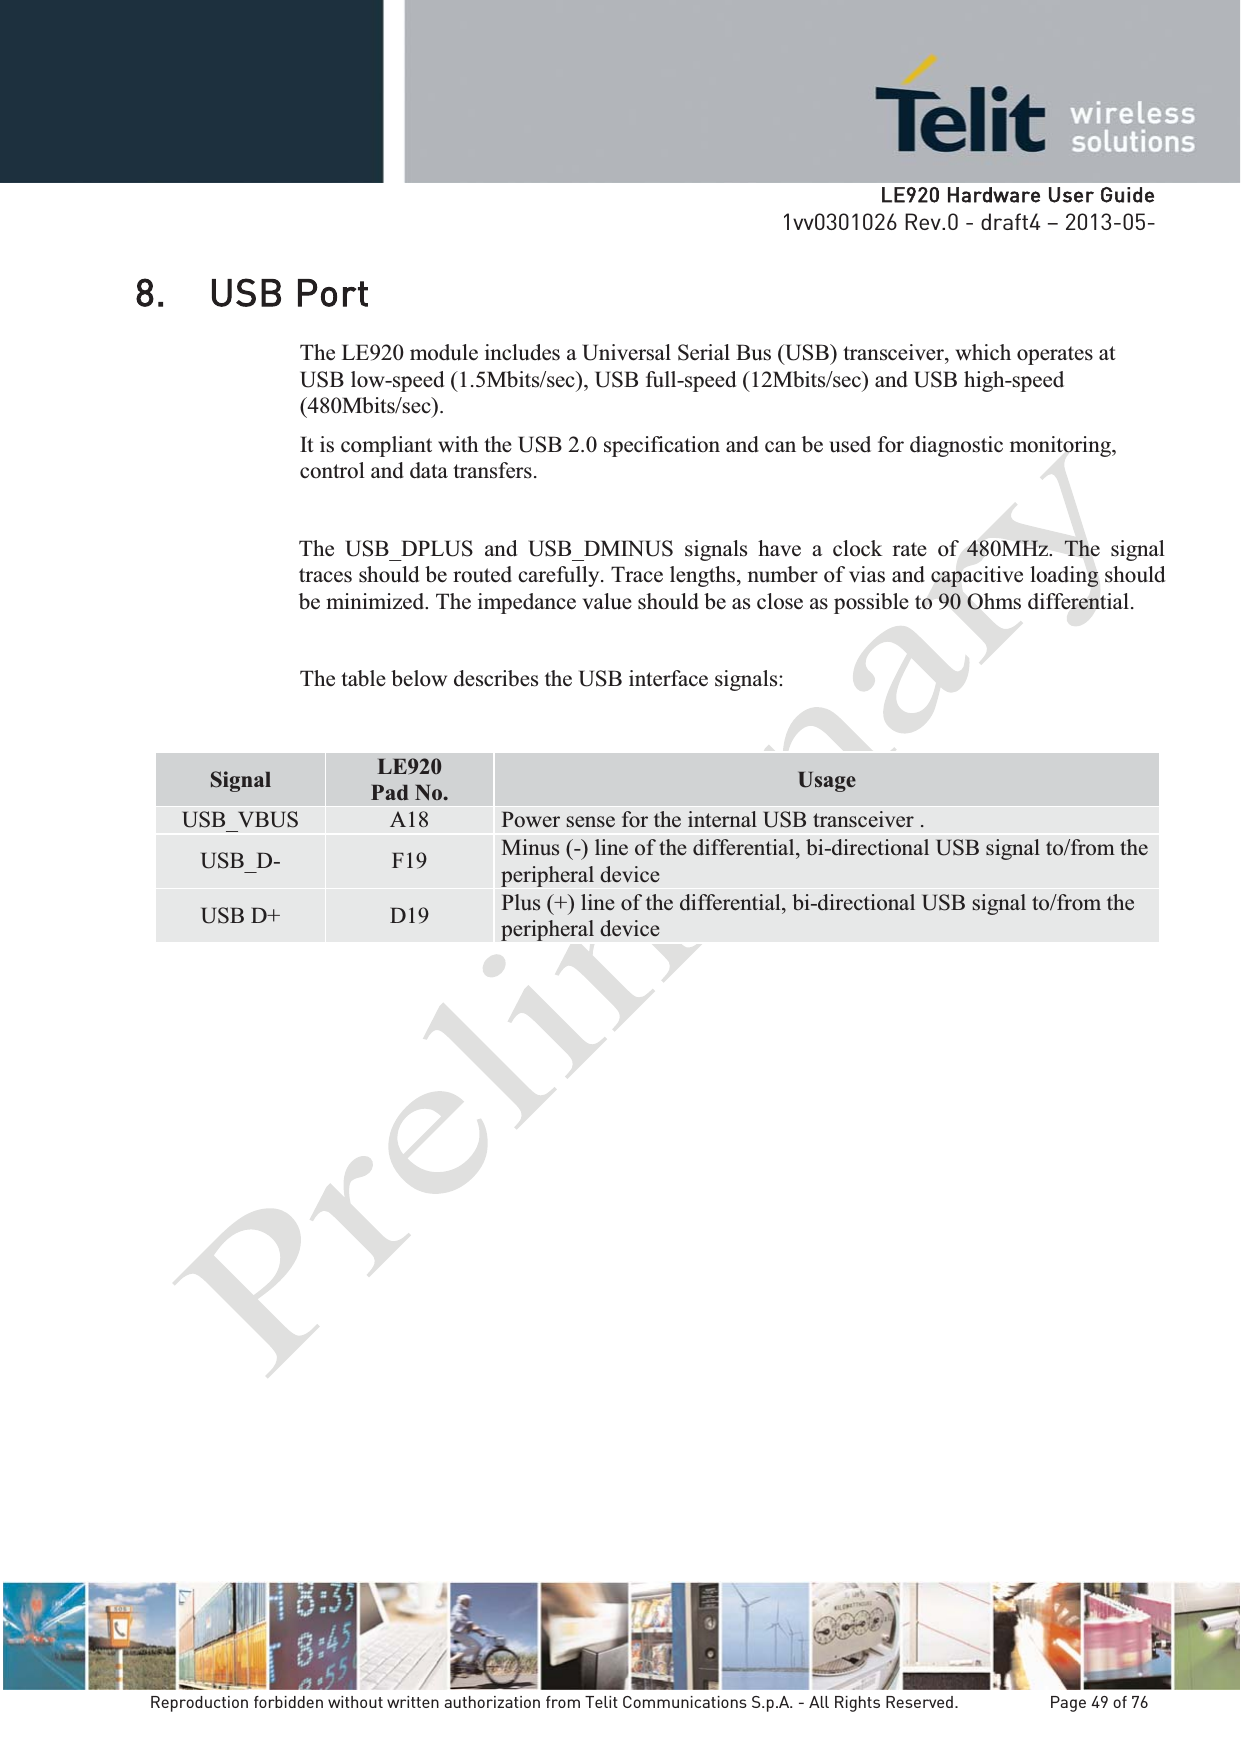   LLE920 Hardware User Guide1vv0301026 Rev.0 - draft4 – 2013-05-Reproduction forbidden without written authorization from Telit Communications S.p.A. - All Rights Reserved.    Page 49 of 76 8. USB Port The LE920 module includes a Universal Serial Bus (USB) transceiver, which operates at USB low-speed (1.5Mbits/sec), USB full-speed (12Mbits/sec) and USB high-speed (480Mbits/sec). It is compliant with the USB 2.0 specification and can be used for diagnostic monitoring, control and data transfers.  The USB_DPLUS and USB_DMINUS signals have a clock rate of 480MHz. The signal traces should be routed carefully. Trace lengths, number of vias and capacitive loading should be minimized. The impedance value should be as close as possible to 90 Ohms differential. The table below describes the USB interface signals:     Signal  LE920 Pad No. Usage USB_VBUS  A18  Power sense for the internal USB transceiver .  USB_D-  F19  Minus (-) line of the differential, bi-directional USB signal to/from the peripheral device USB D+  D19  Plus (+) line of the differential, bi-directional USB signal to/from the peripheral device 